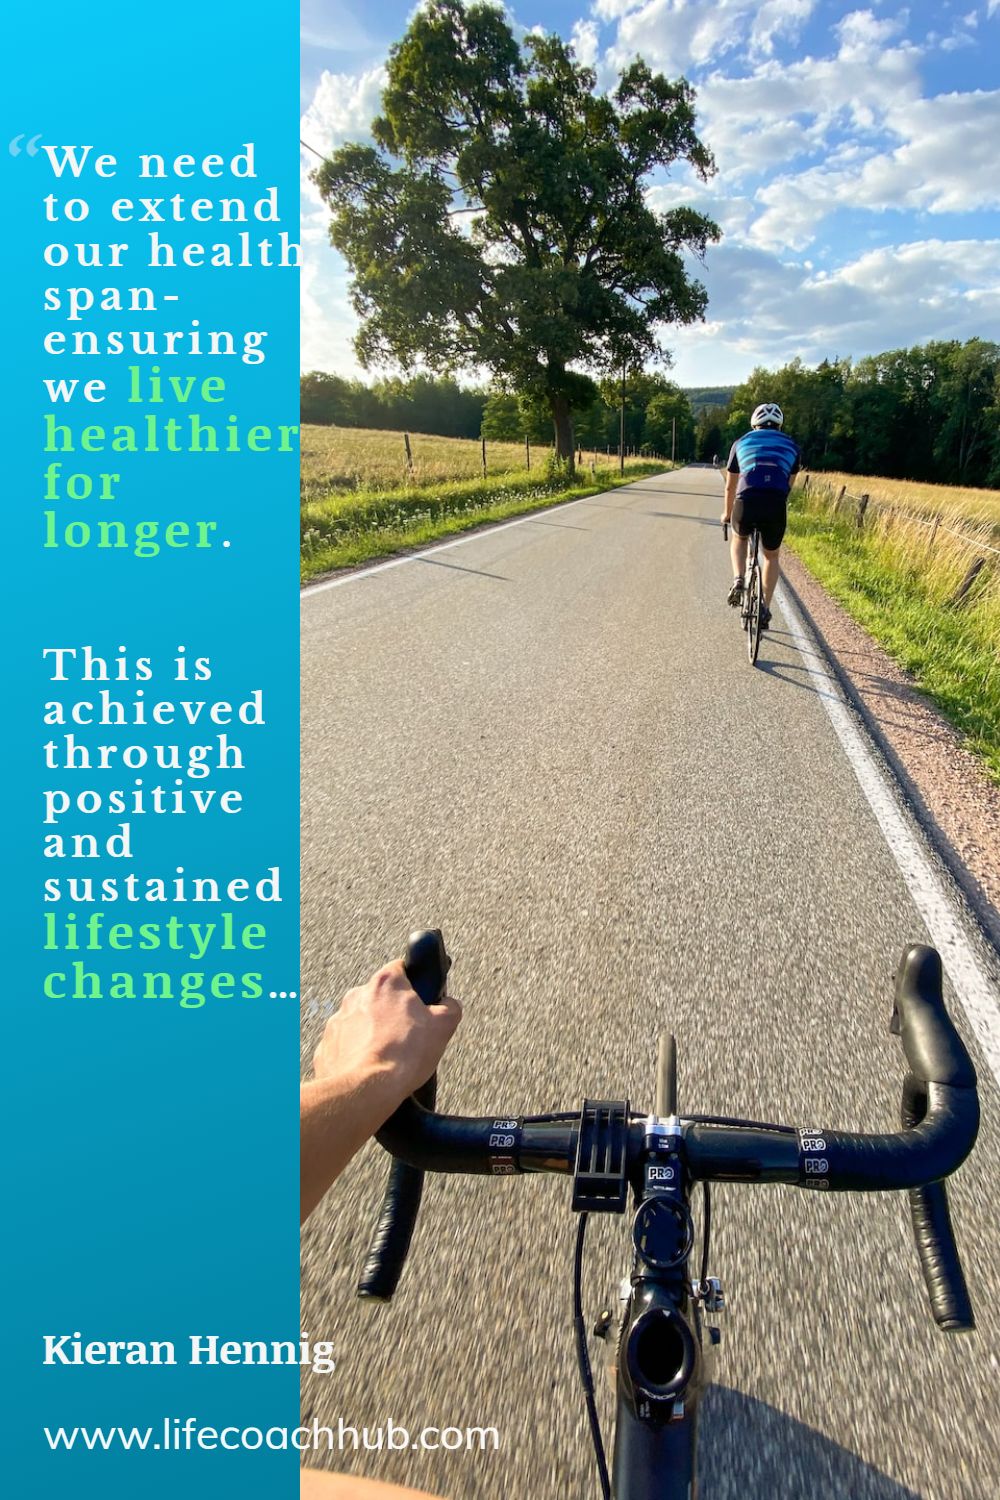 We need to extend our health span- ensuring we live healthier for longer. This is achieved through positive and sustained lifestyle changes. Kieran Hennig Coaching Quote